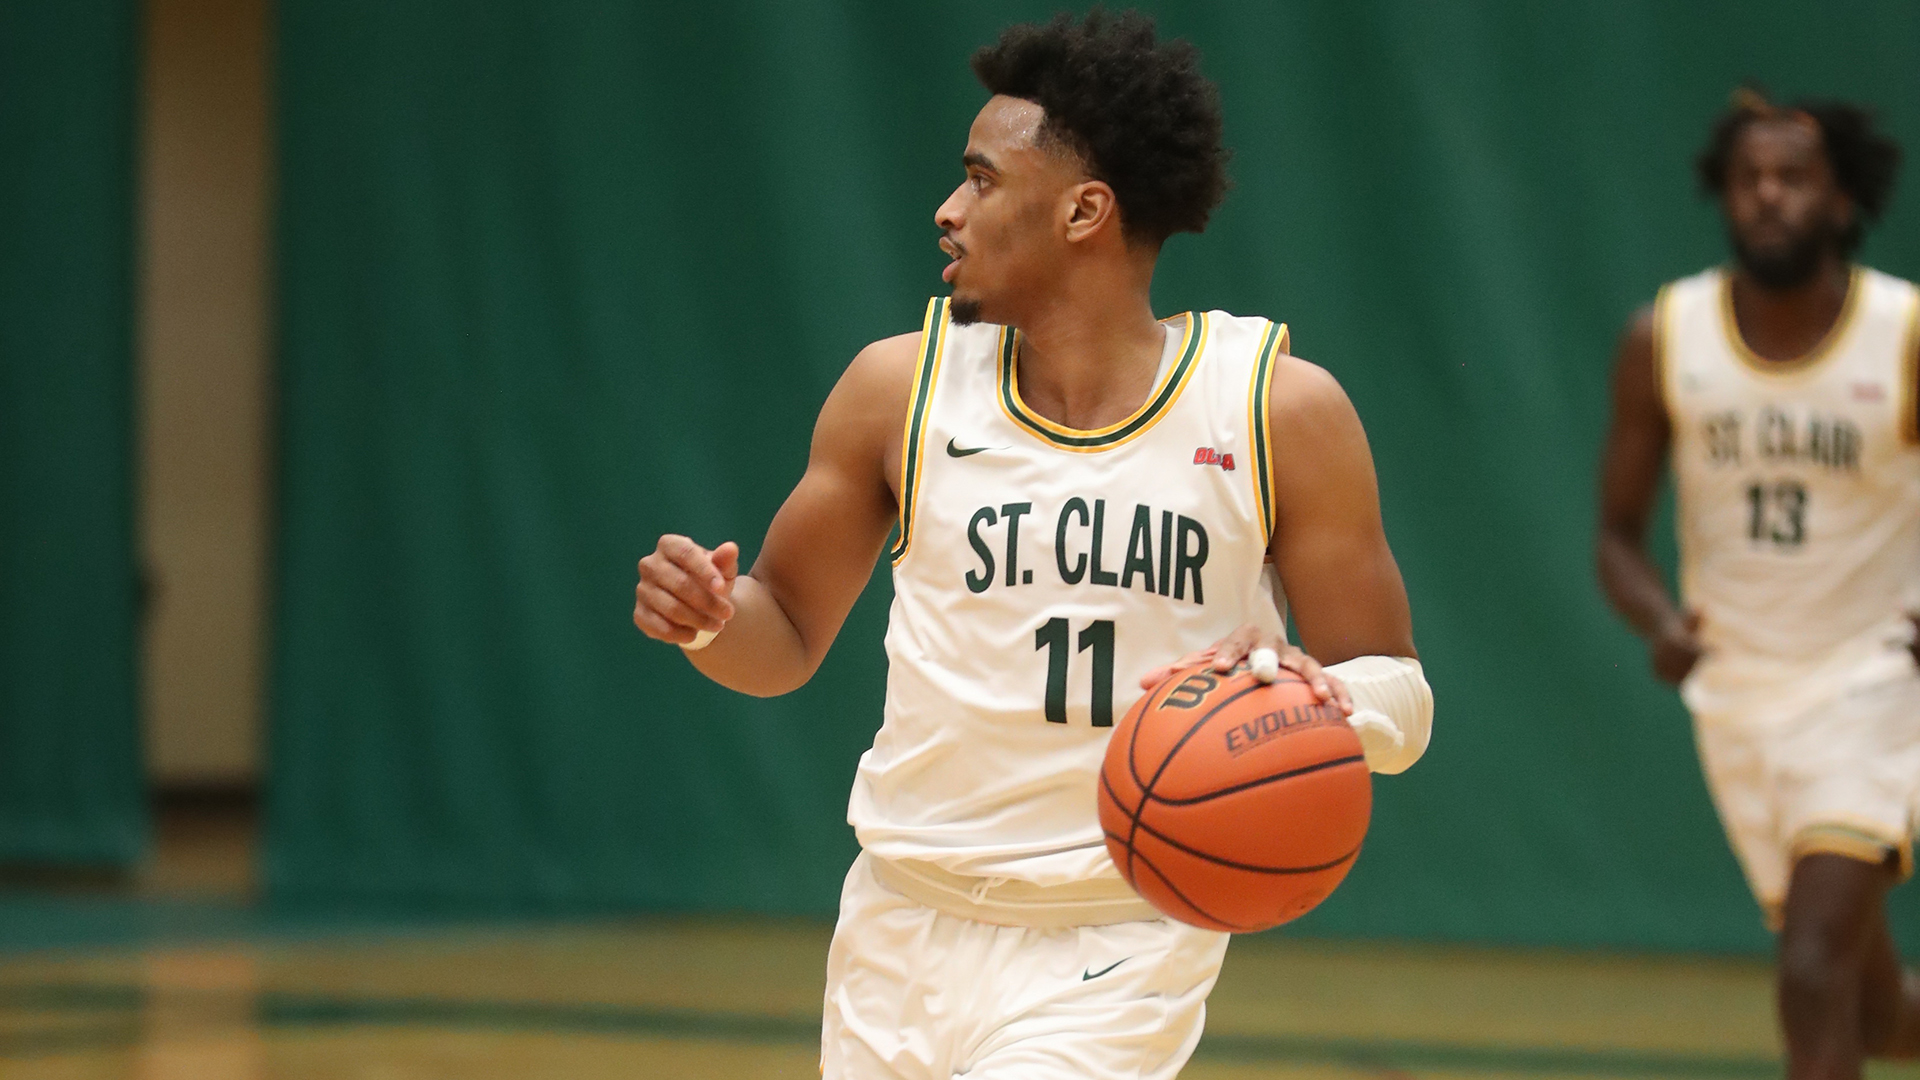 St. Clair Men’s Basketball Go 3-0 at Dawson Tournament in Montreal